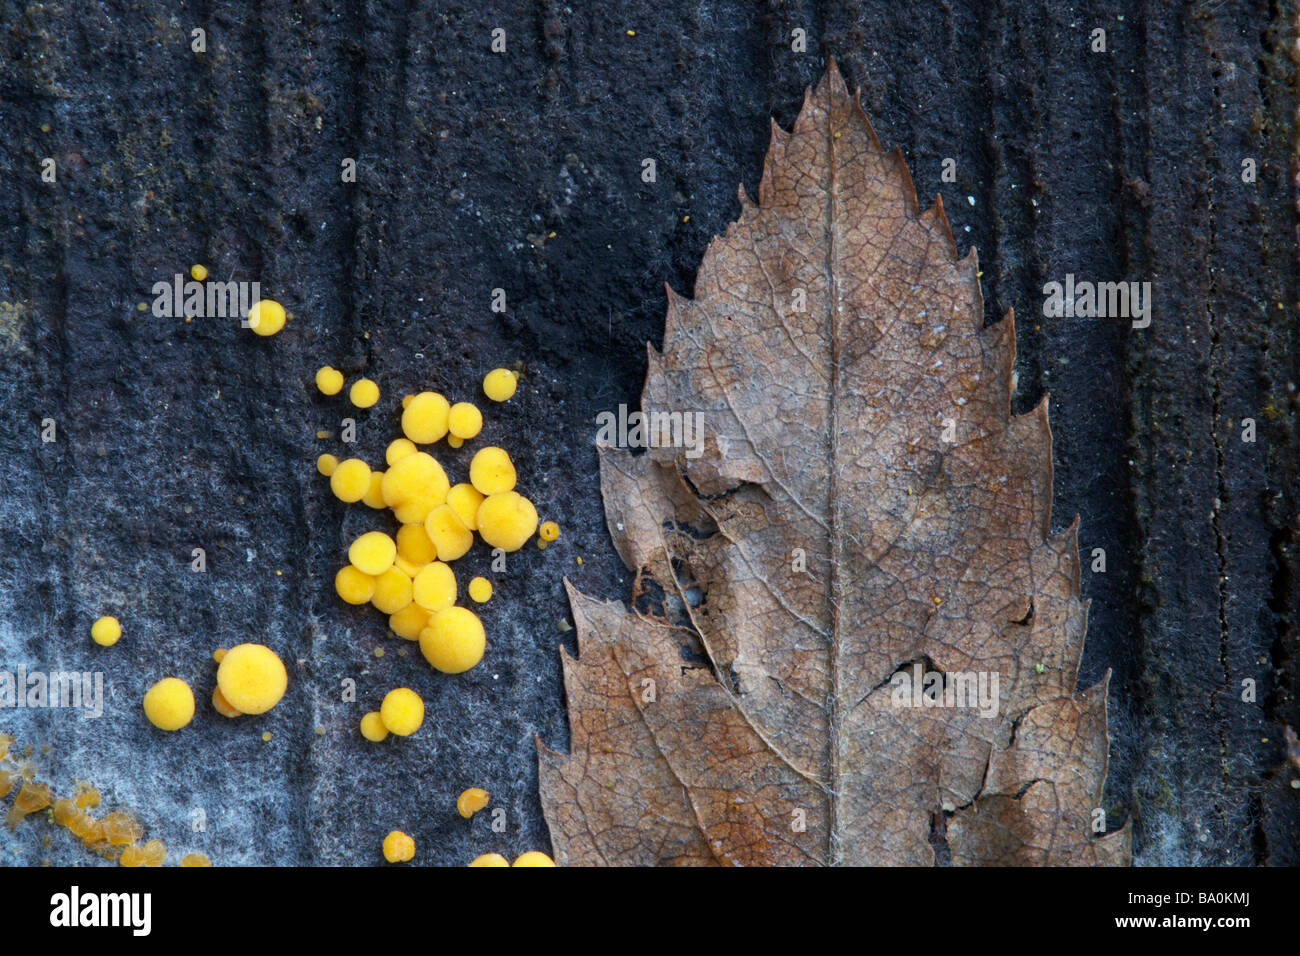 Fungi and leaf on rotten wood Stock Photo